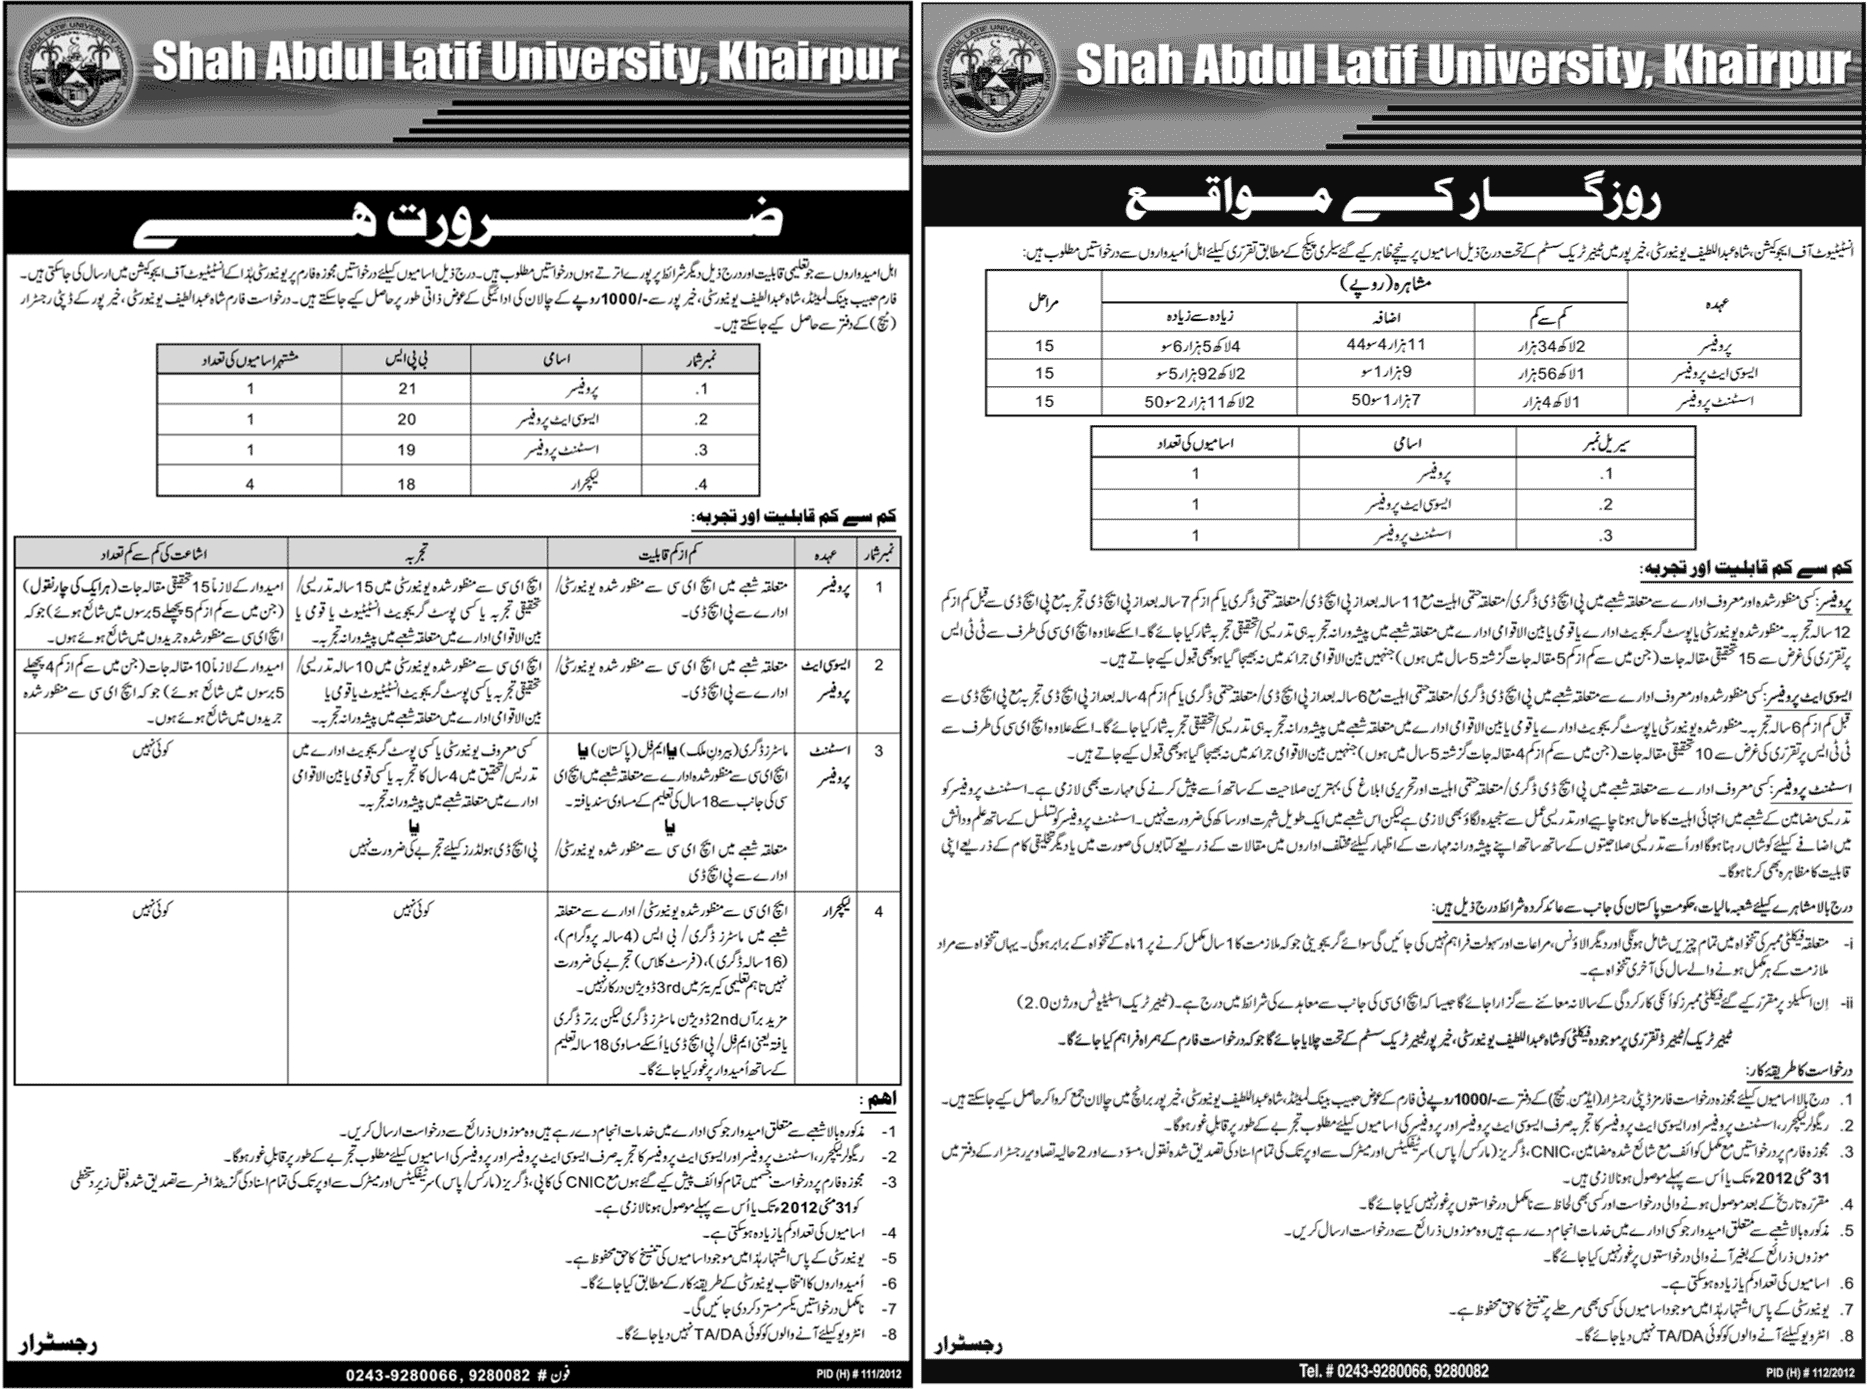 Professors, Associate Professors and Lecturers required at Shah Abdul Latif University